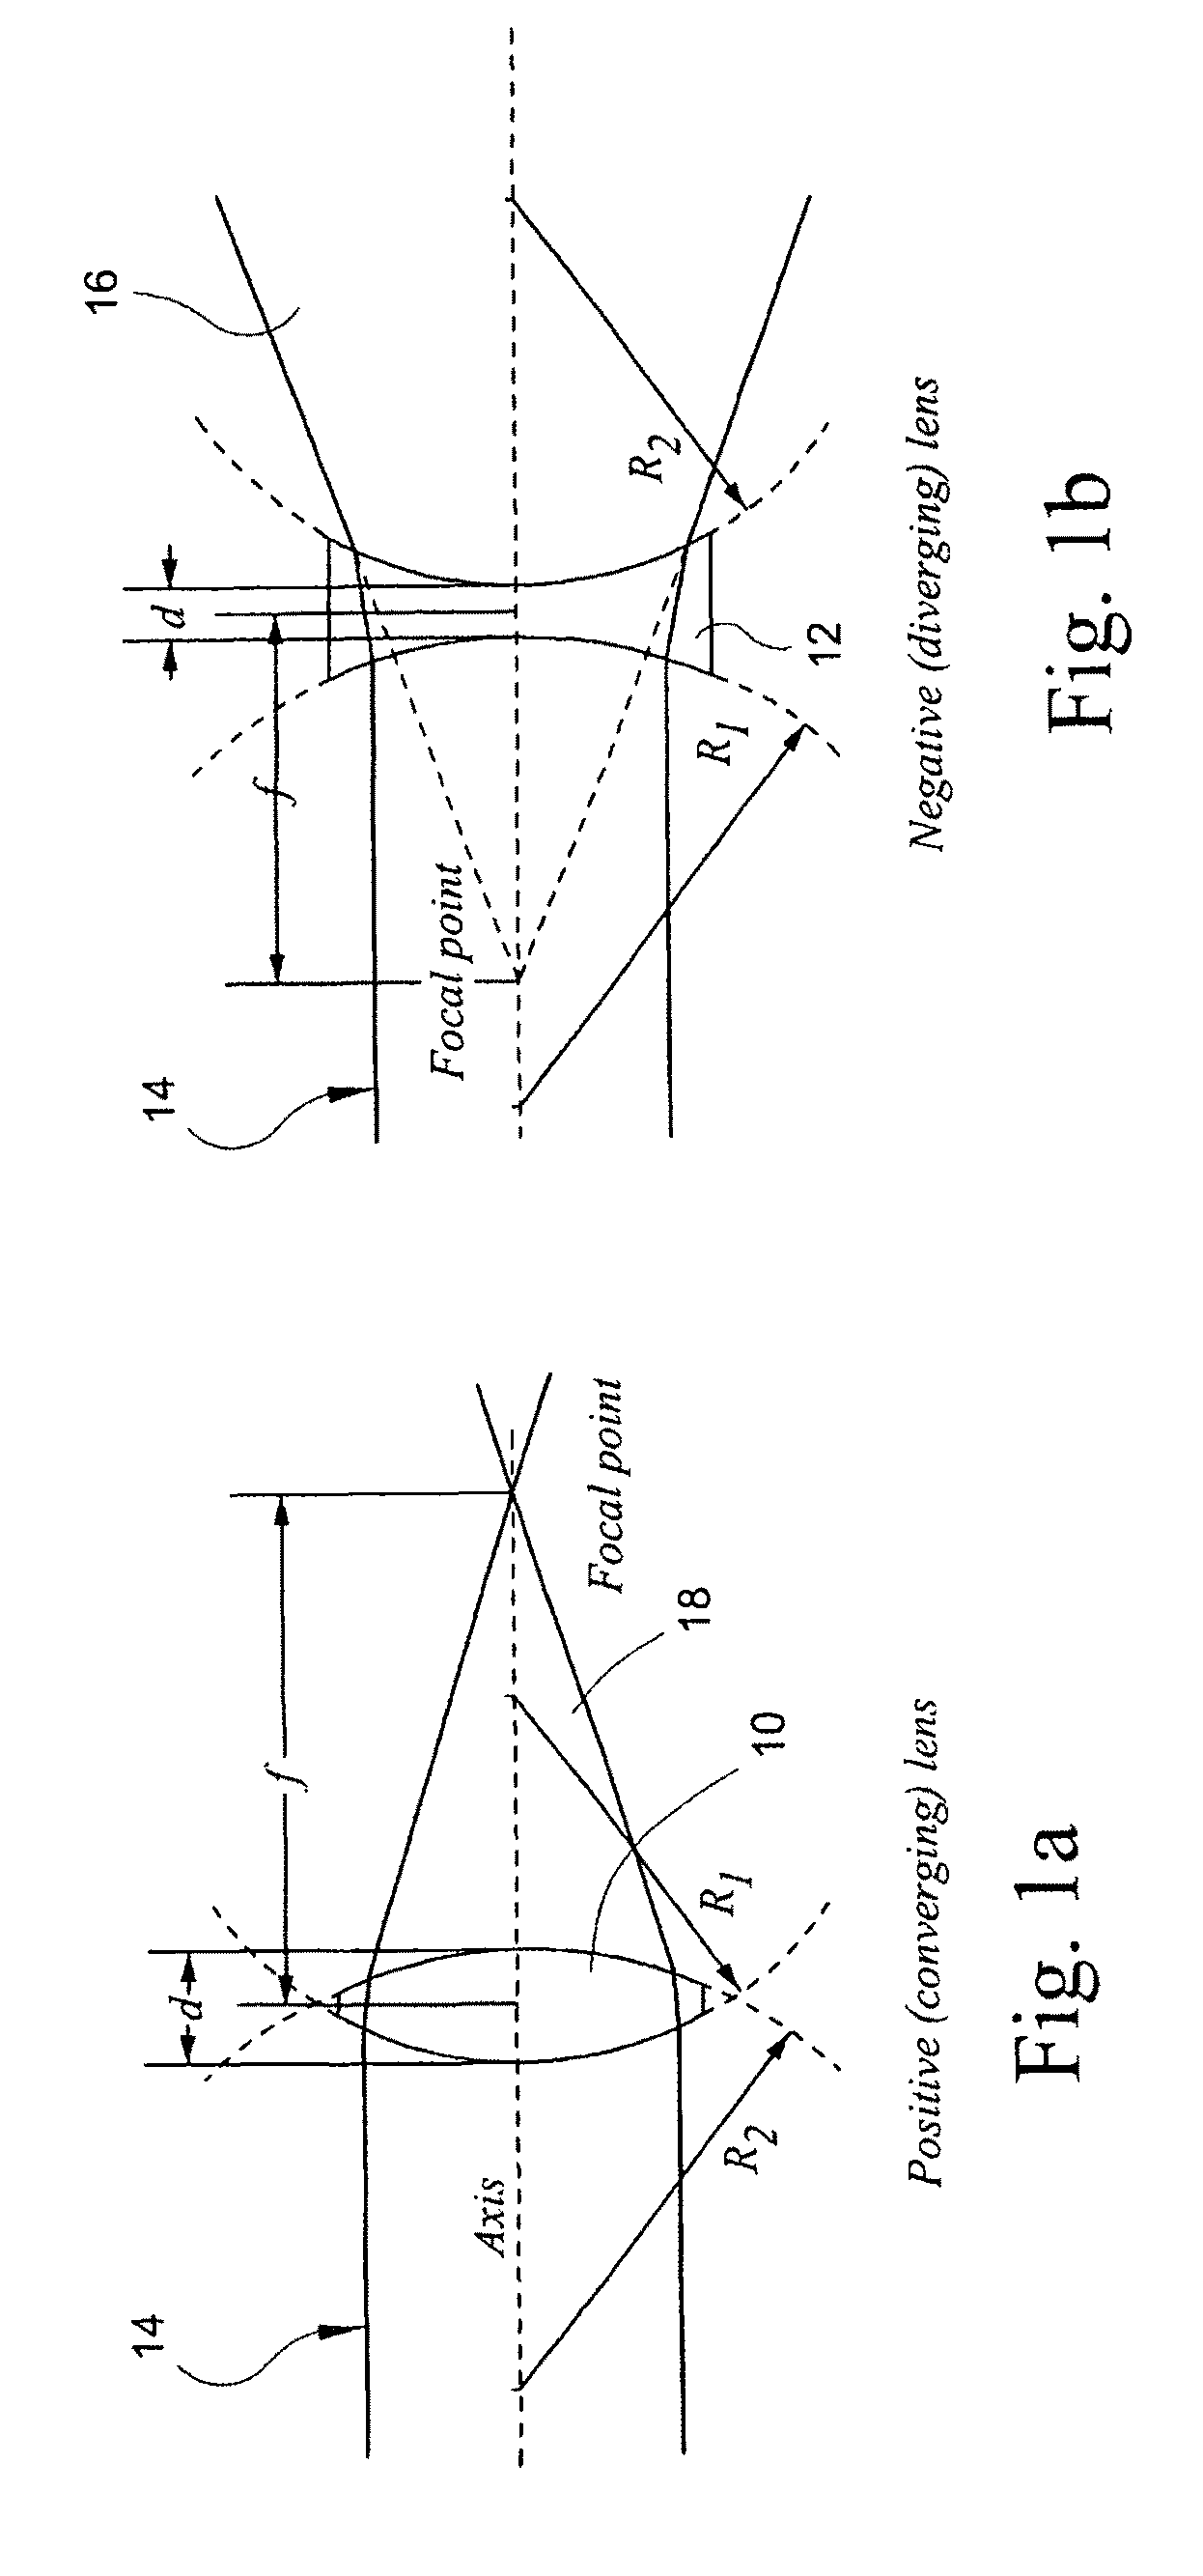 Method of fabricating small dimensioned lens elements and lens arrays using surface tension effects